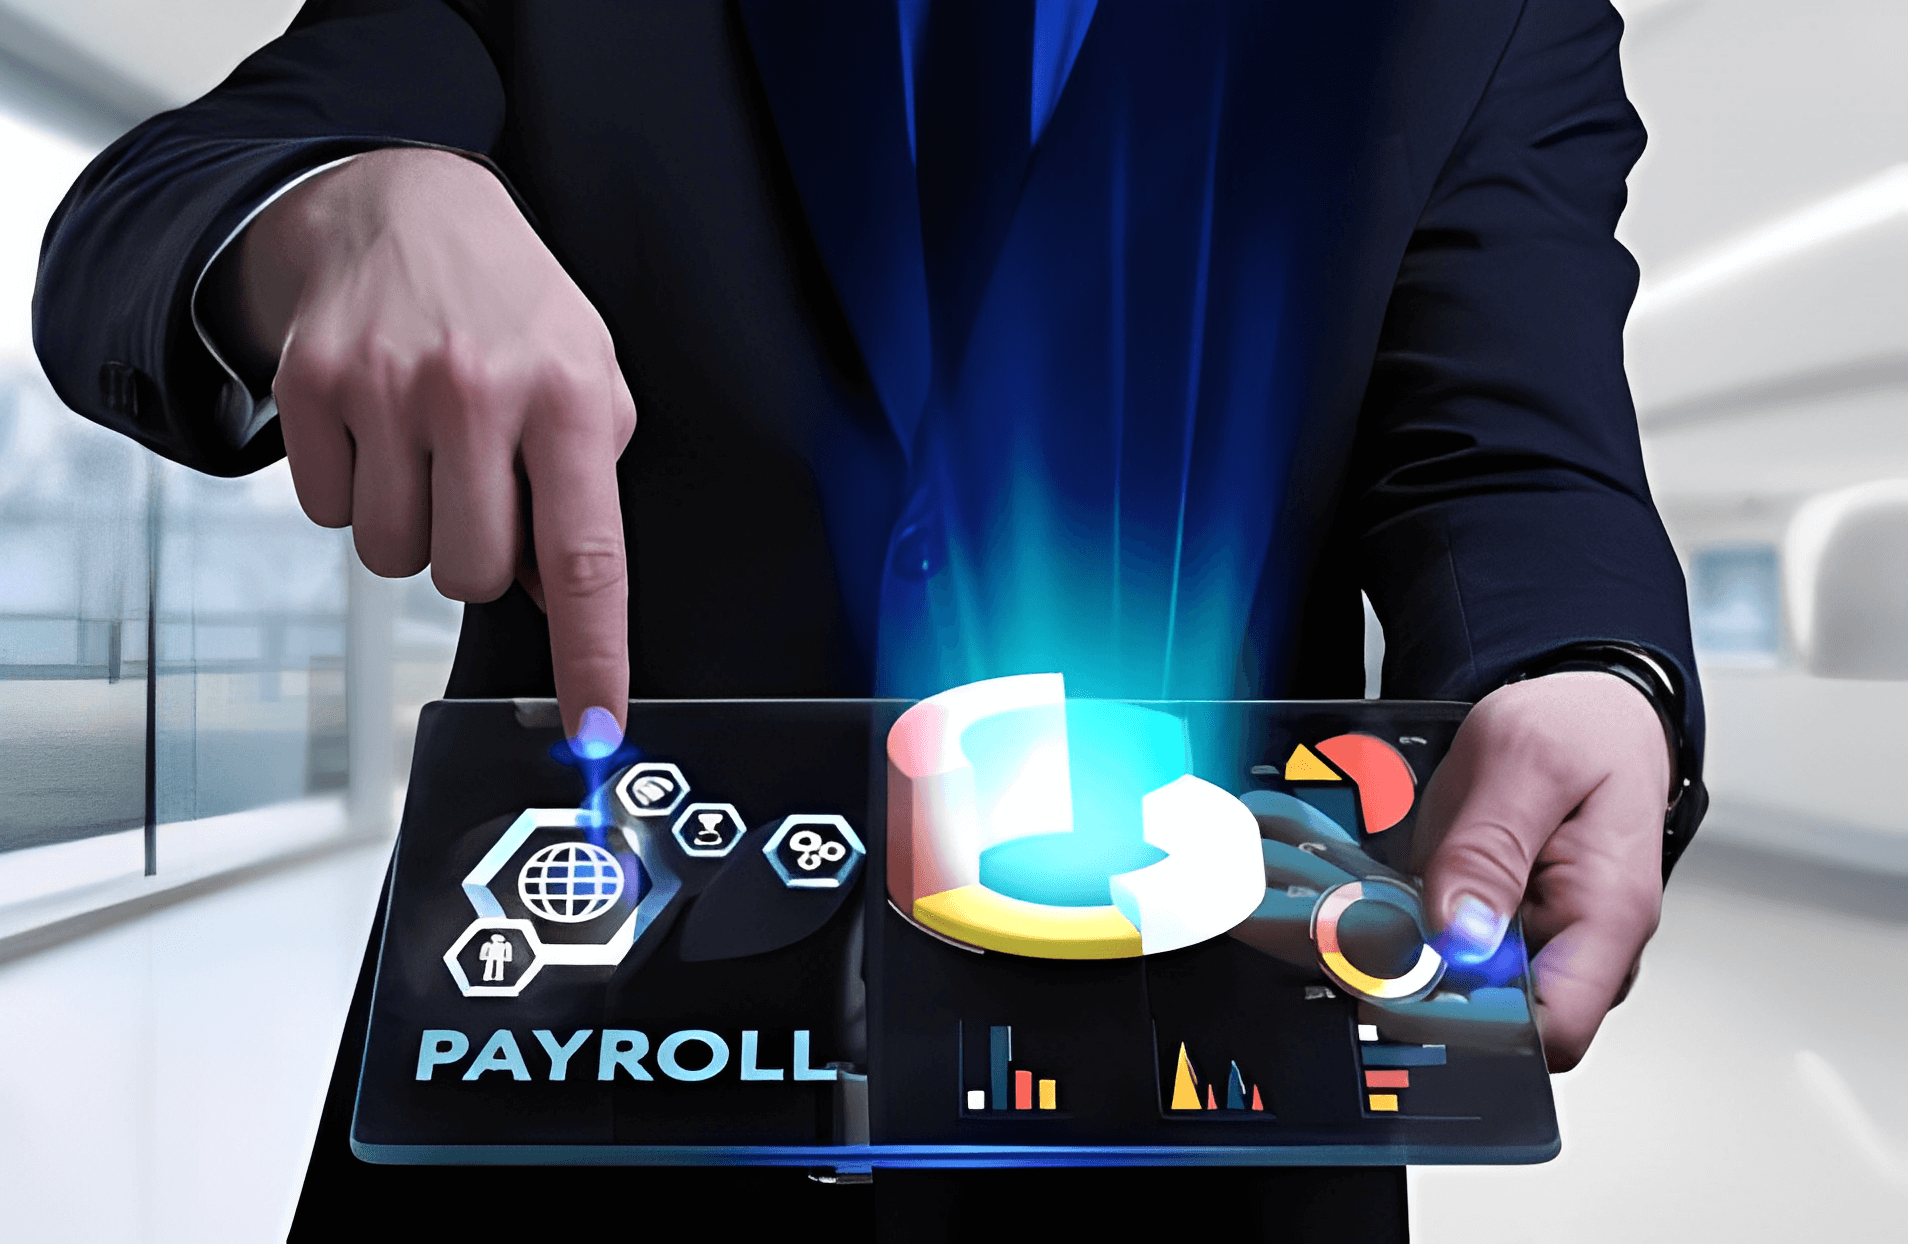 Payroll Software for Tracking Employee Hours